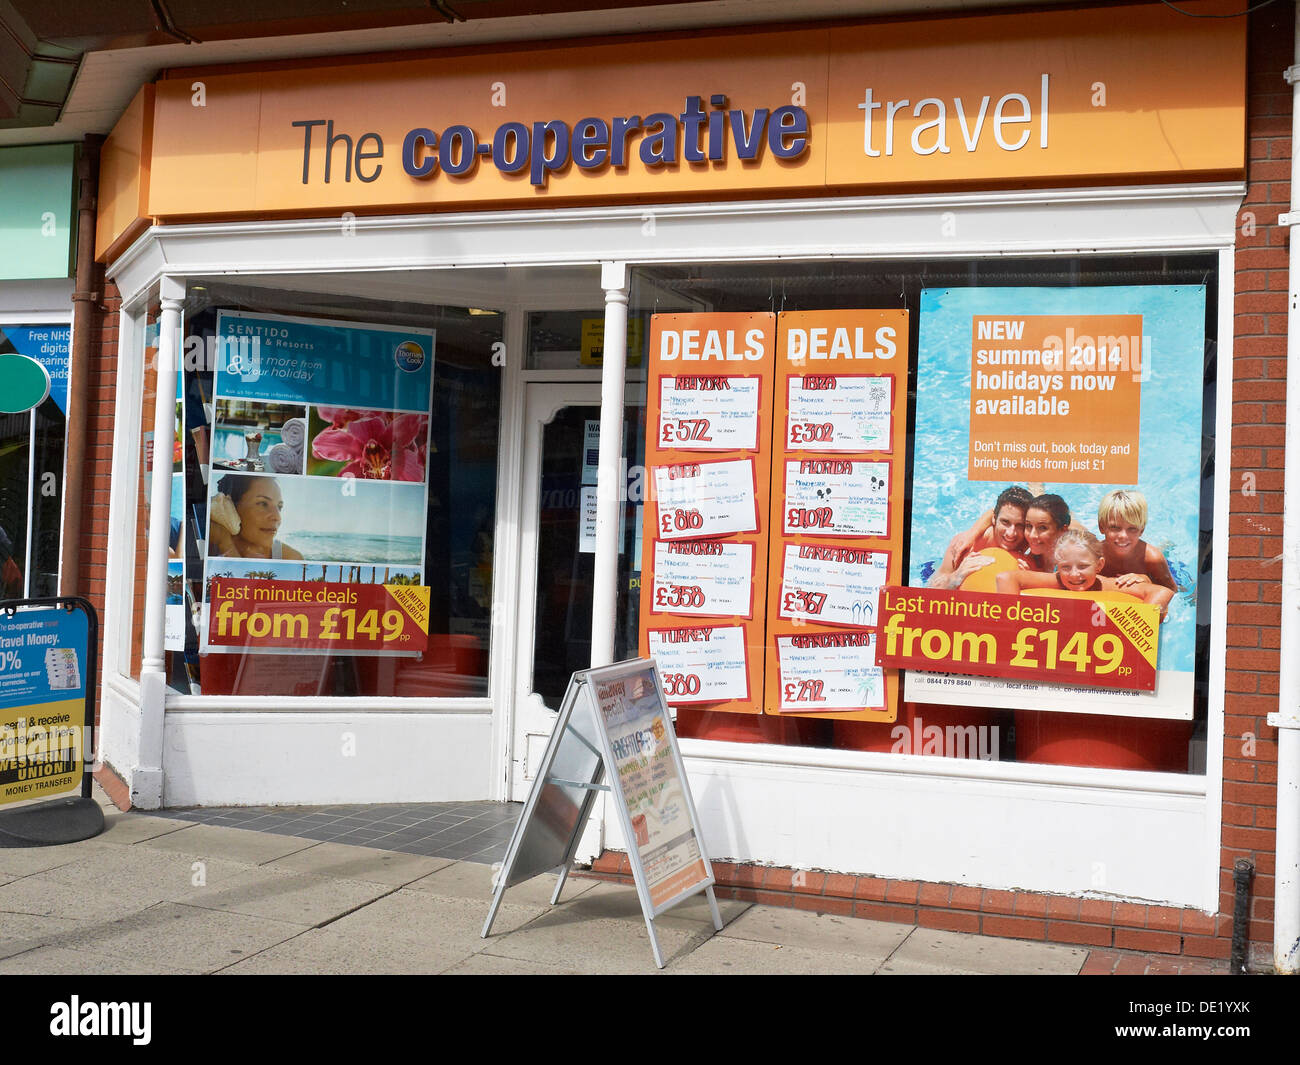 The Co-operative travel shop in Northwich Cheshire UK Stock Photo